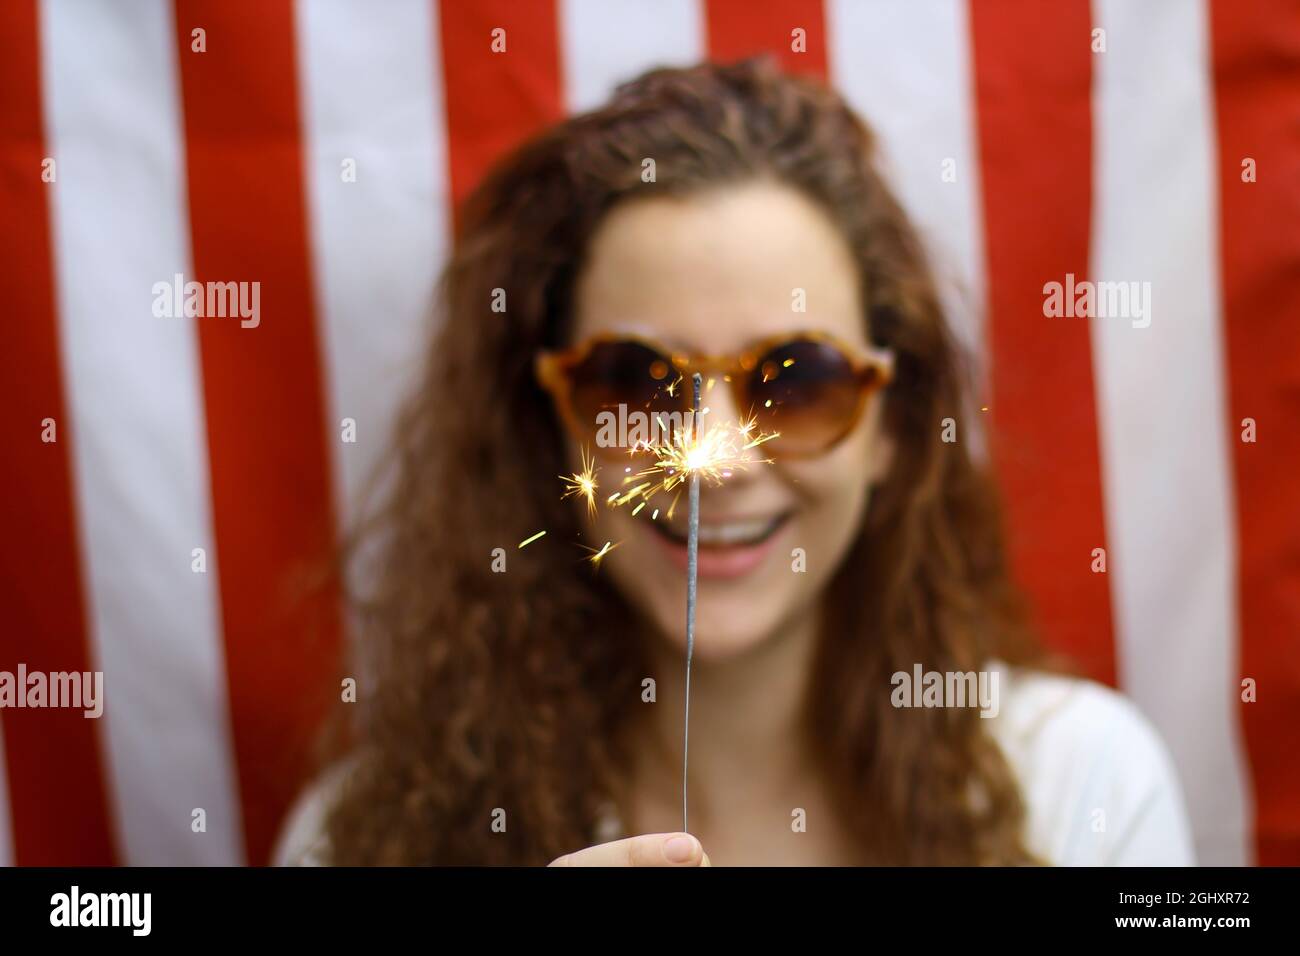 Blurred Young redhead Hispanic and Caucasian woman holding a sparkler in focus standing in front of the American flag. Stock Photo